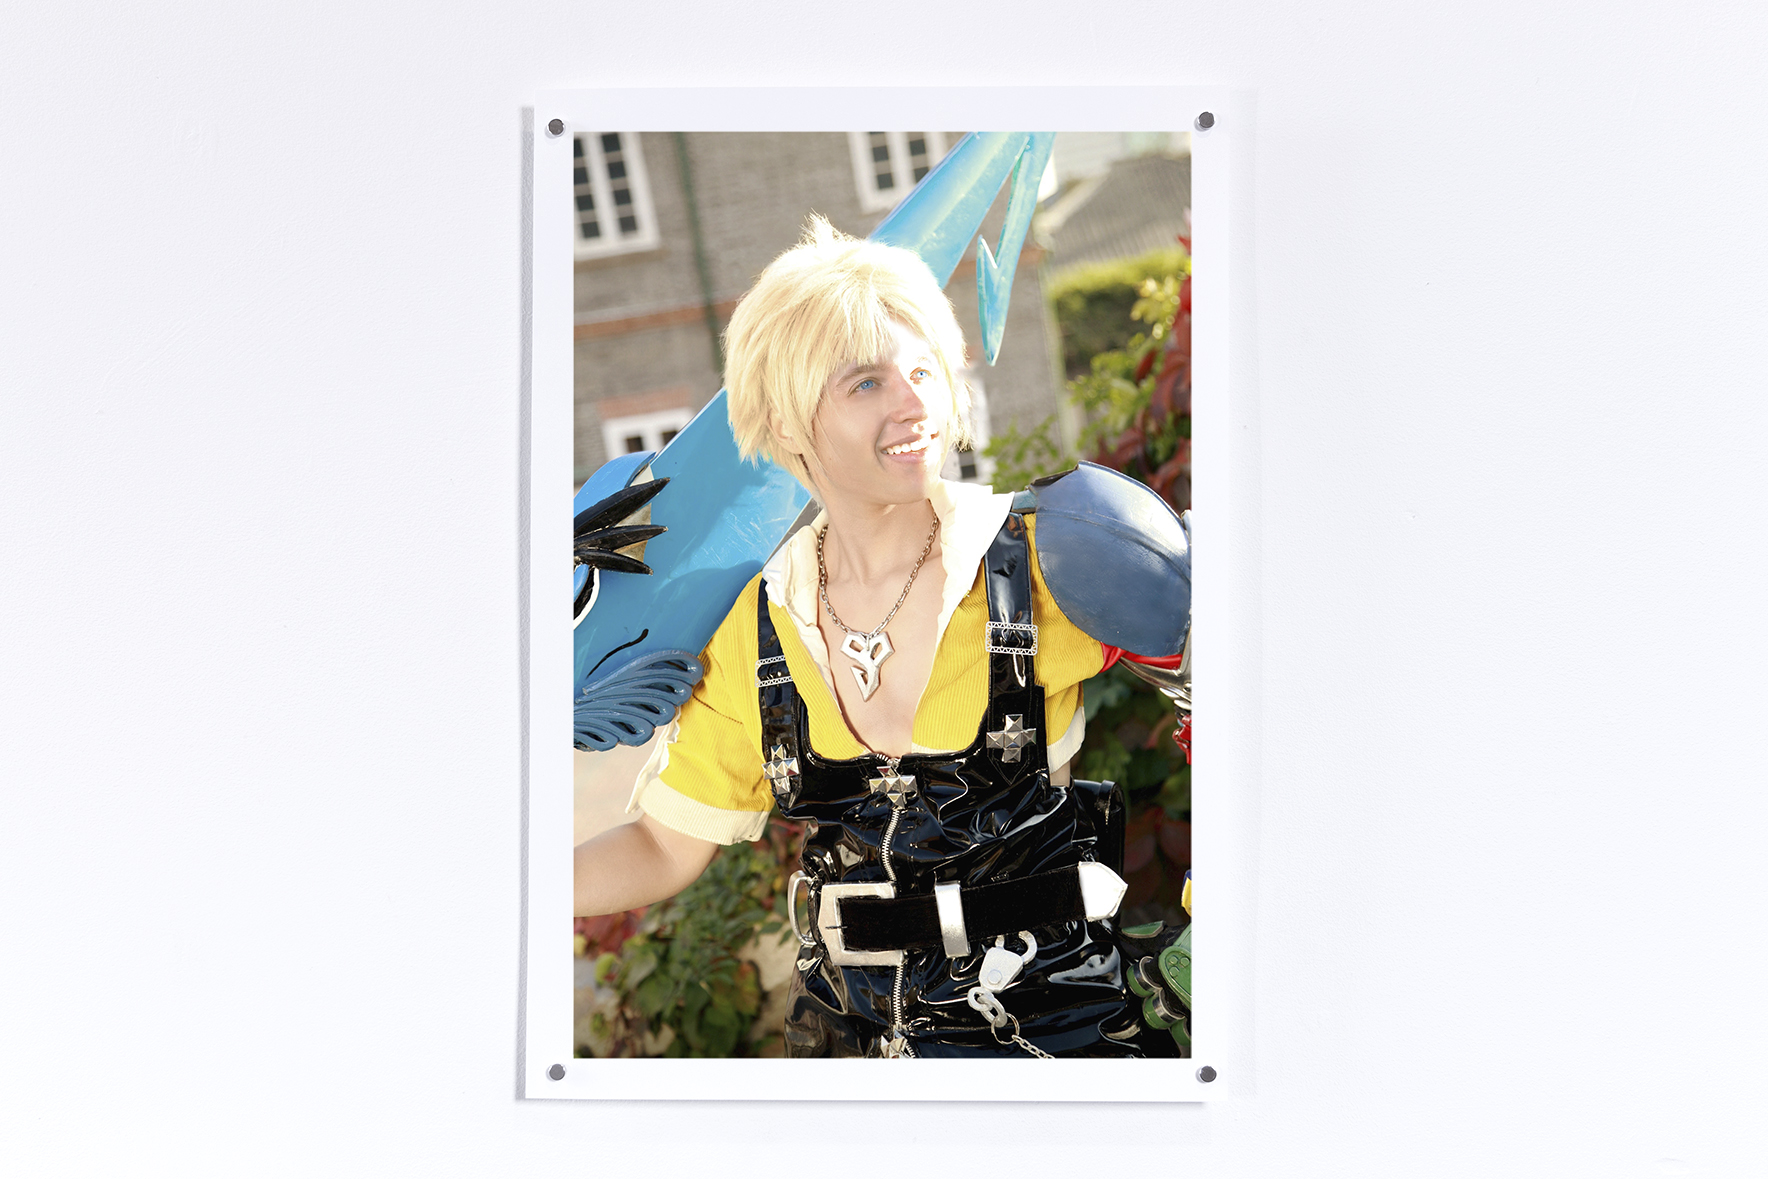 Print hung on a white wall of Tidus from Final Fantasy 10 smiling with a sword with Jesse's face superimposed on the character